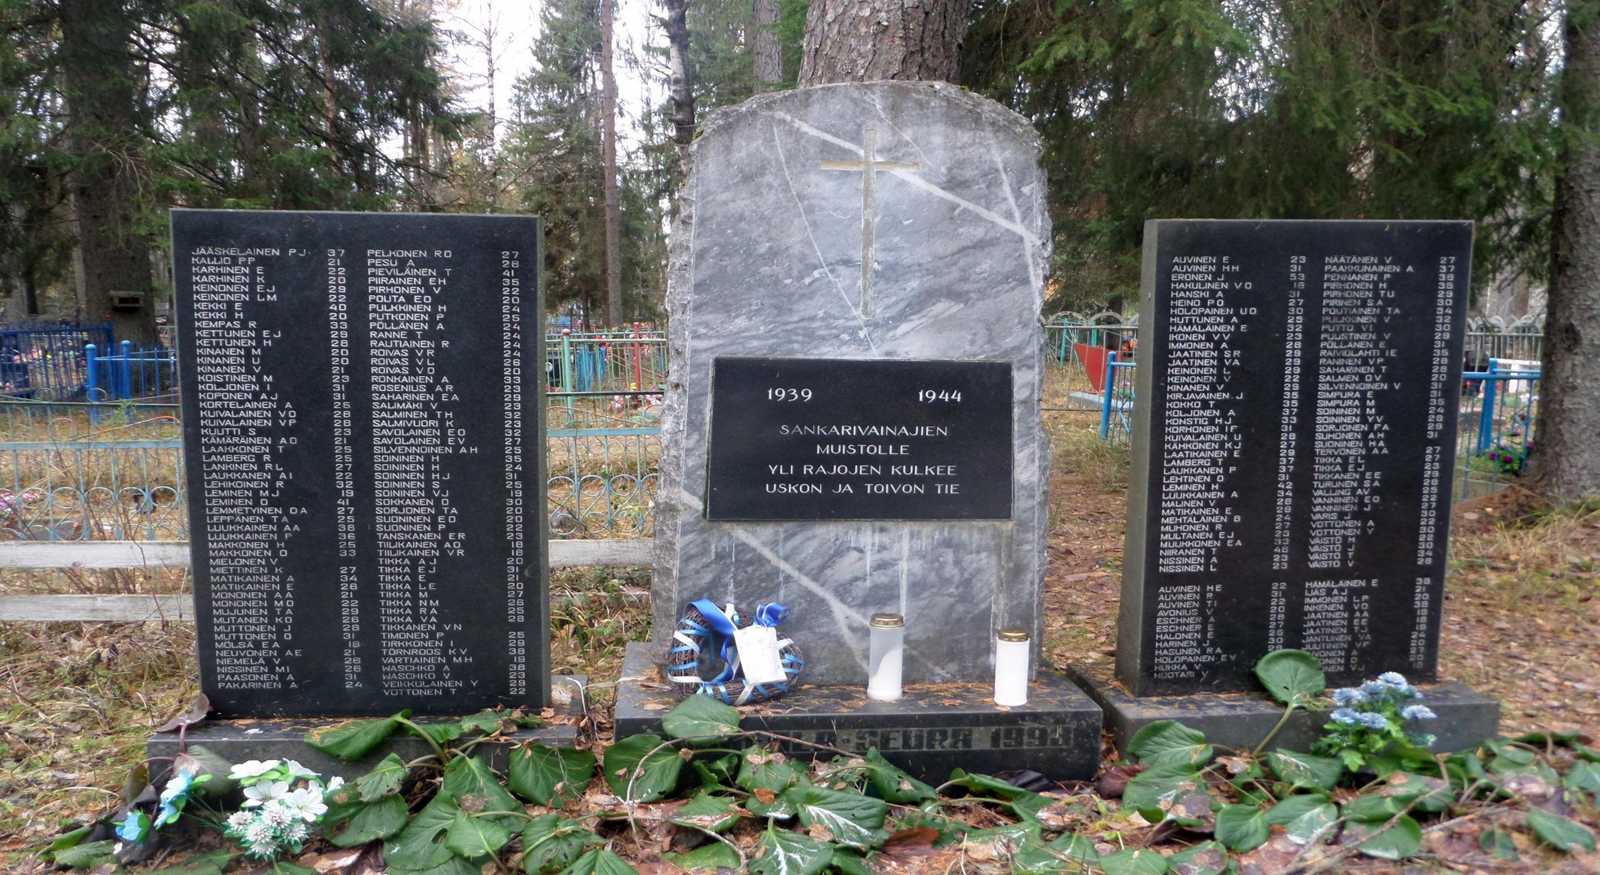 2010's. The common grave of the heroes of 1939-1944